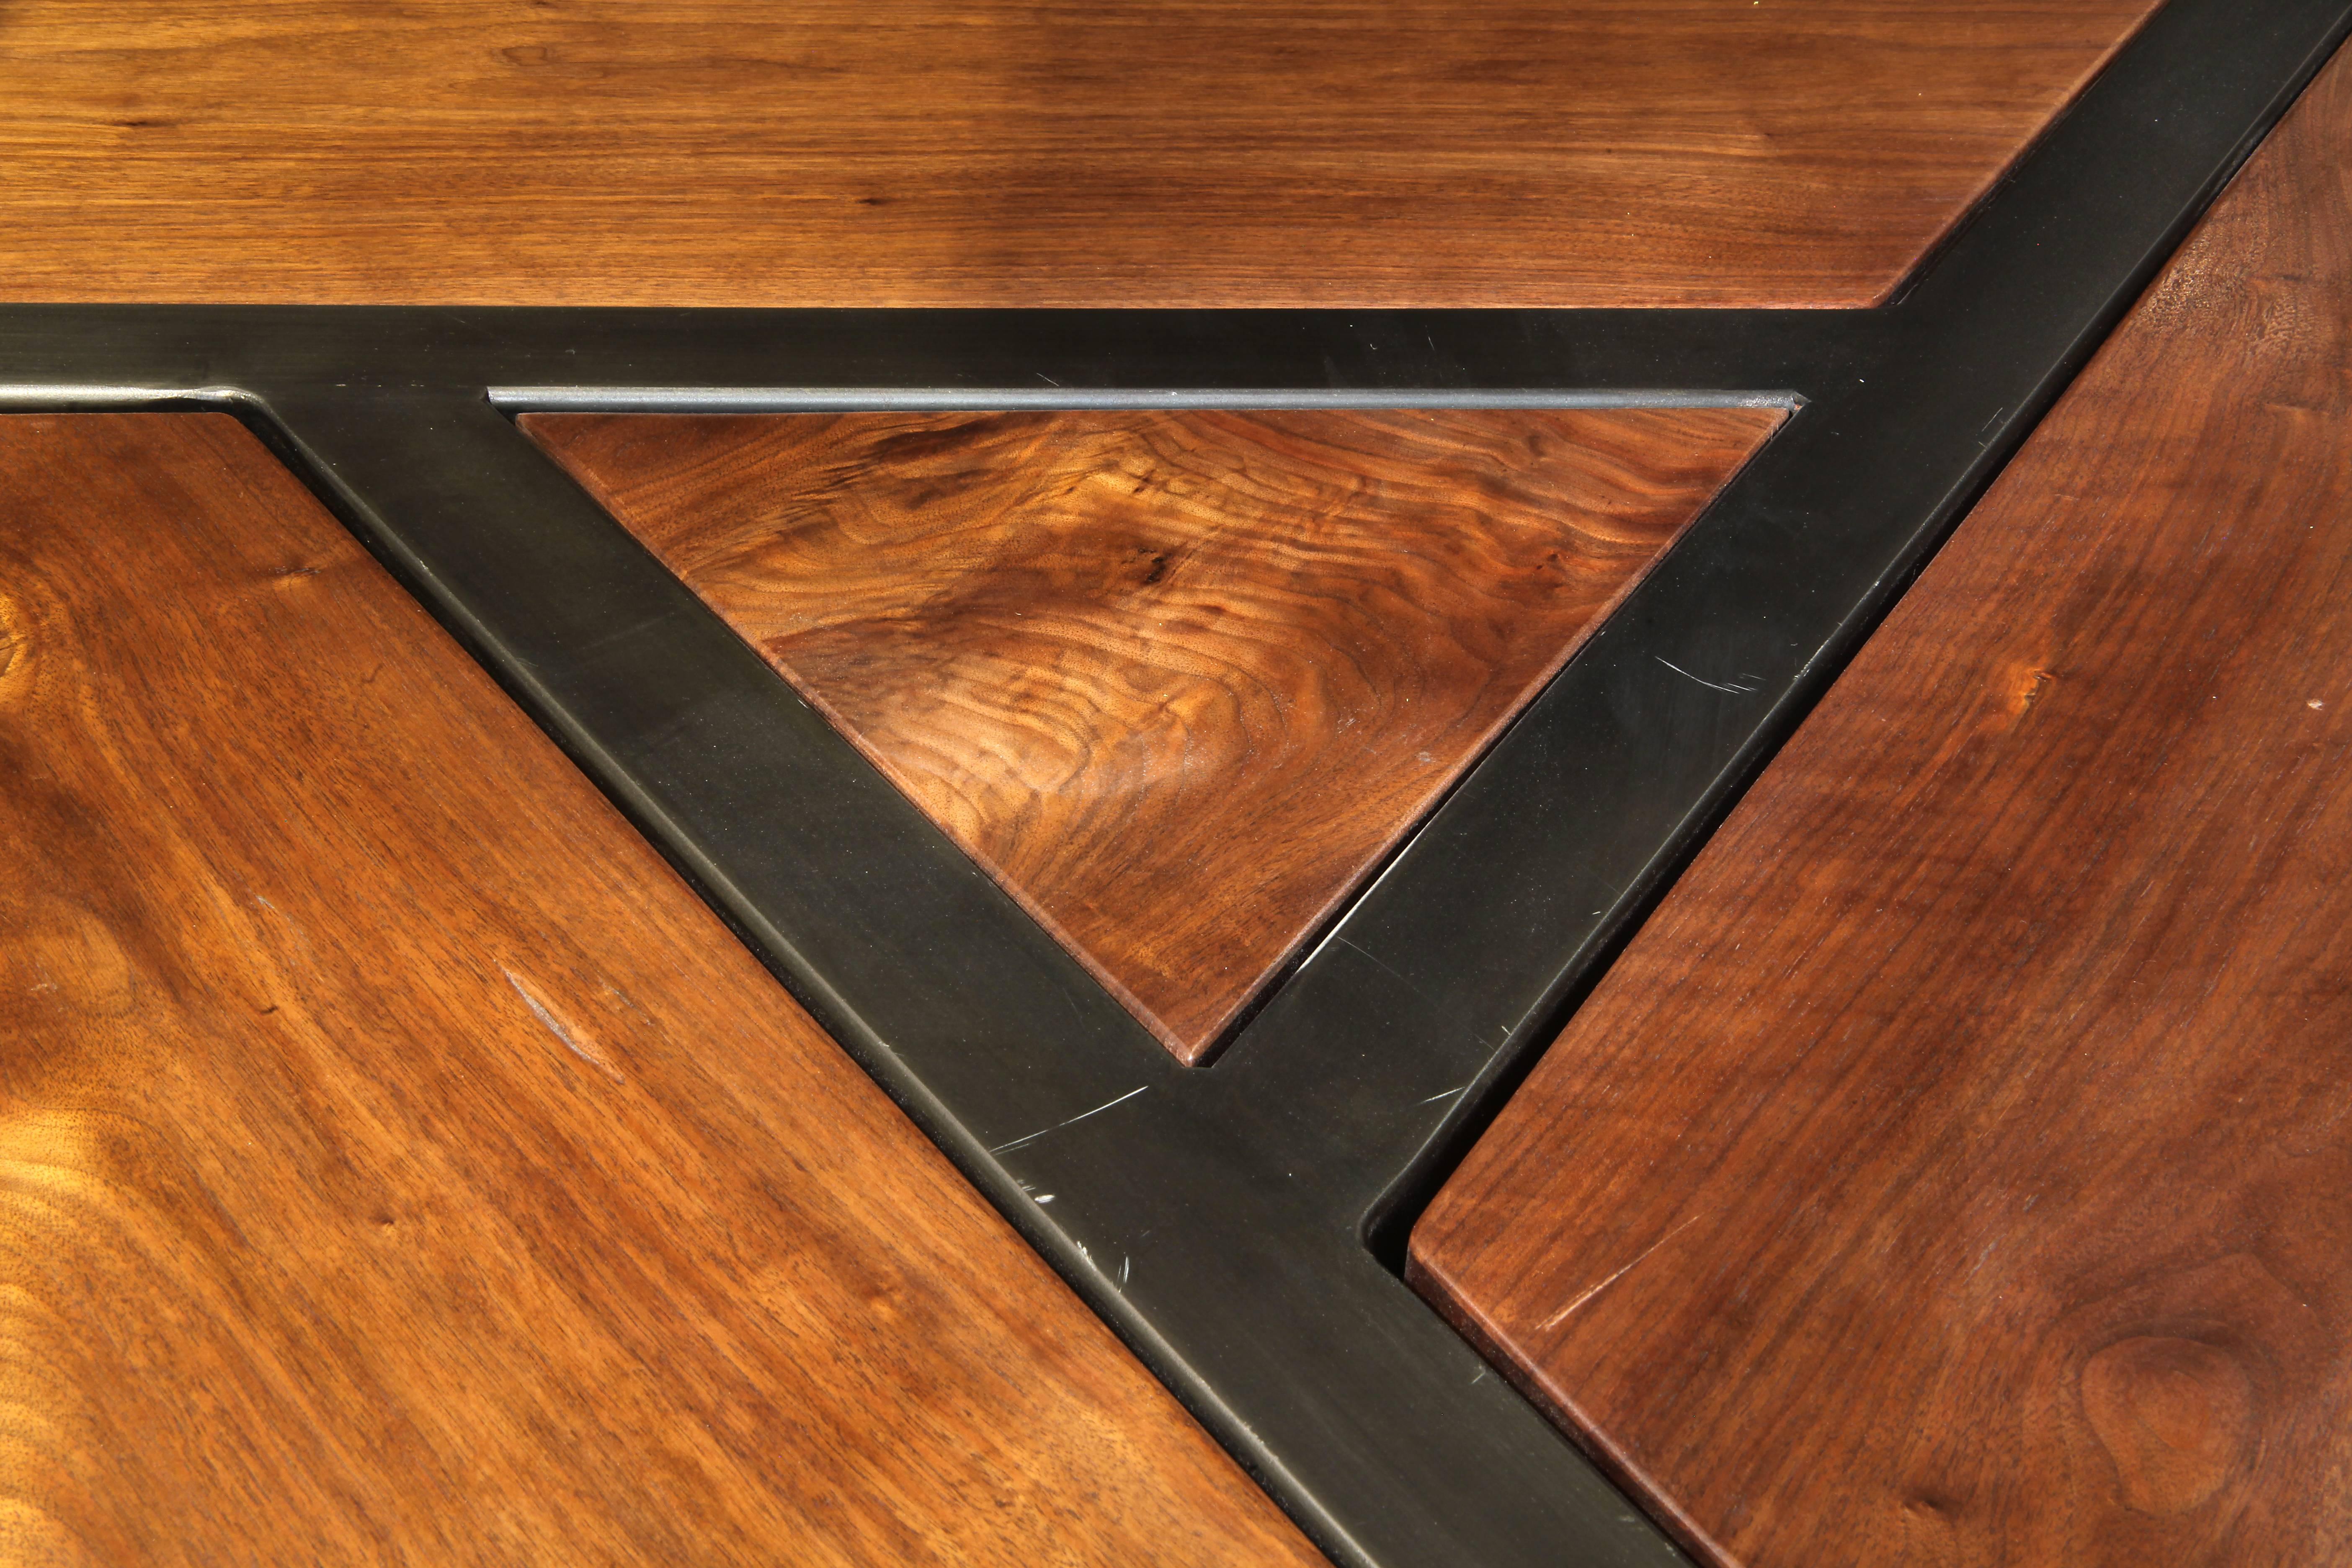 Taking cues from the cracked-ice latticework pattern found in traditional Chinese woodwork, this handsome kitchen table was handcrafted from a locally salvaged tree trunk of American black walnut grown in Cook County. Three bookmatched sections